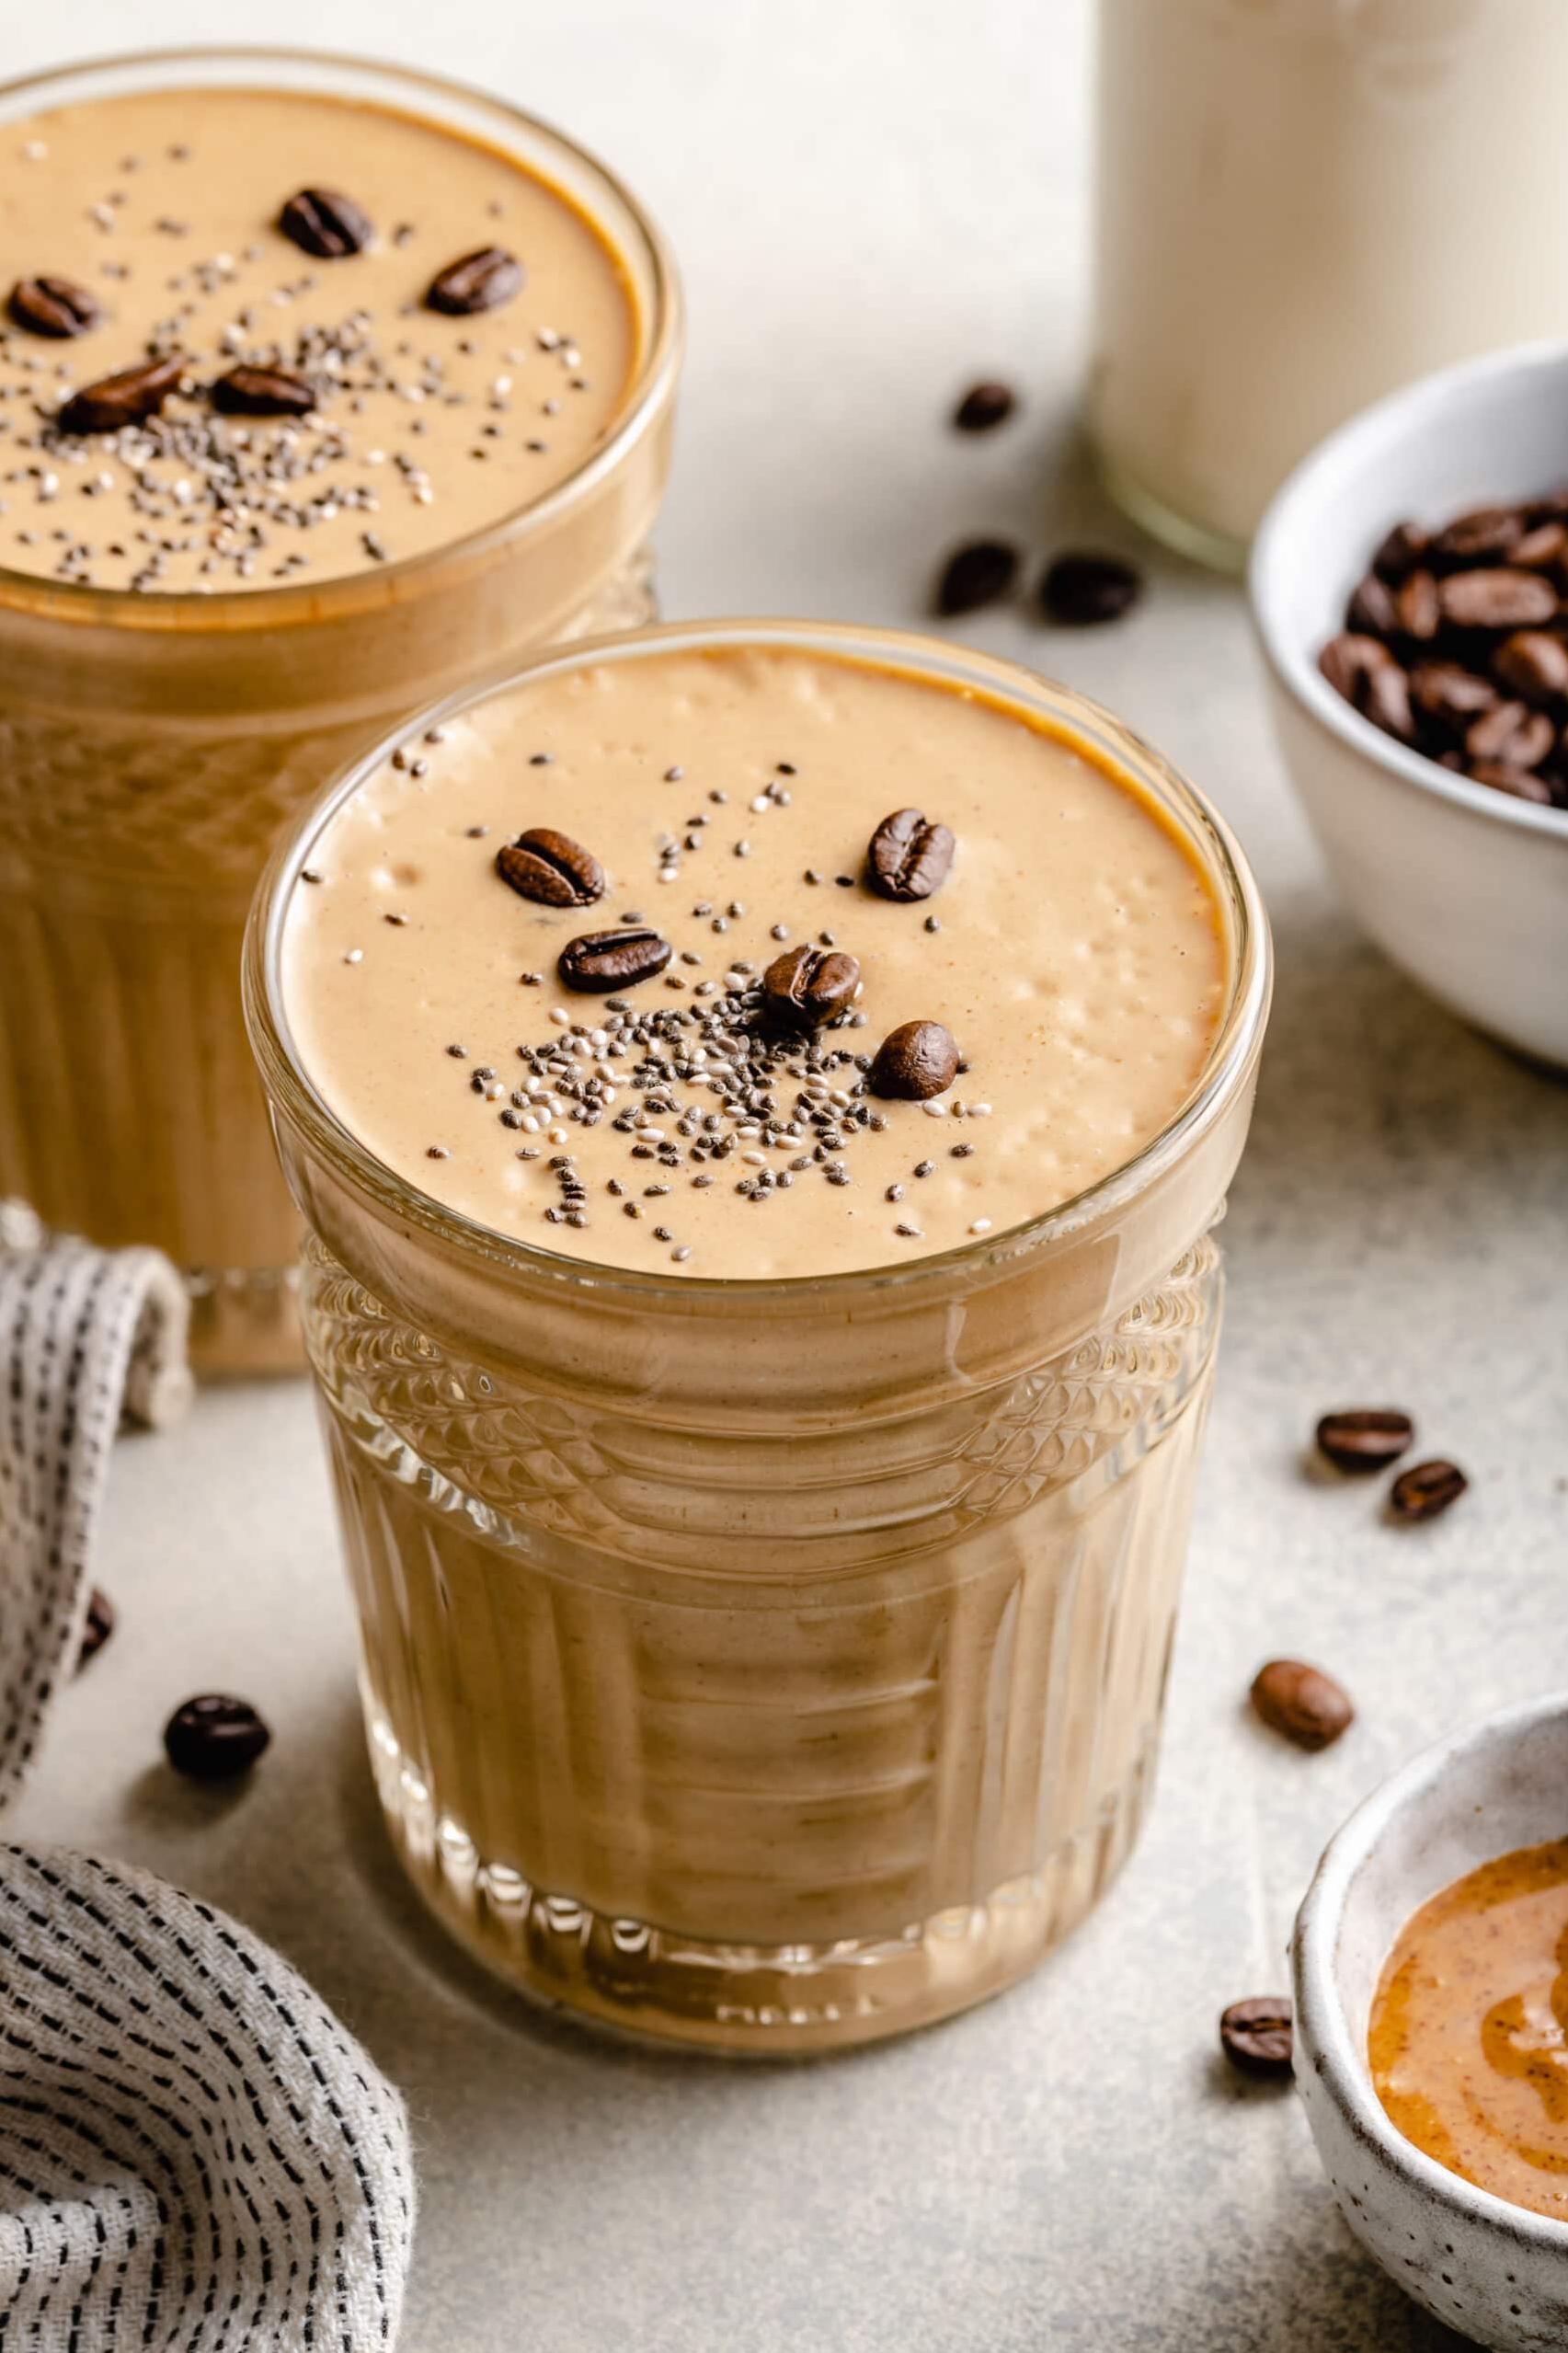  Sip into something cool with this Coffee Smoothie.